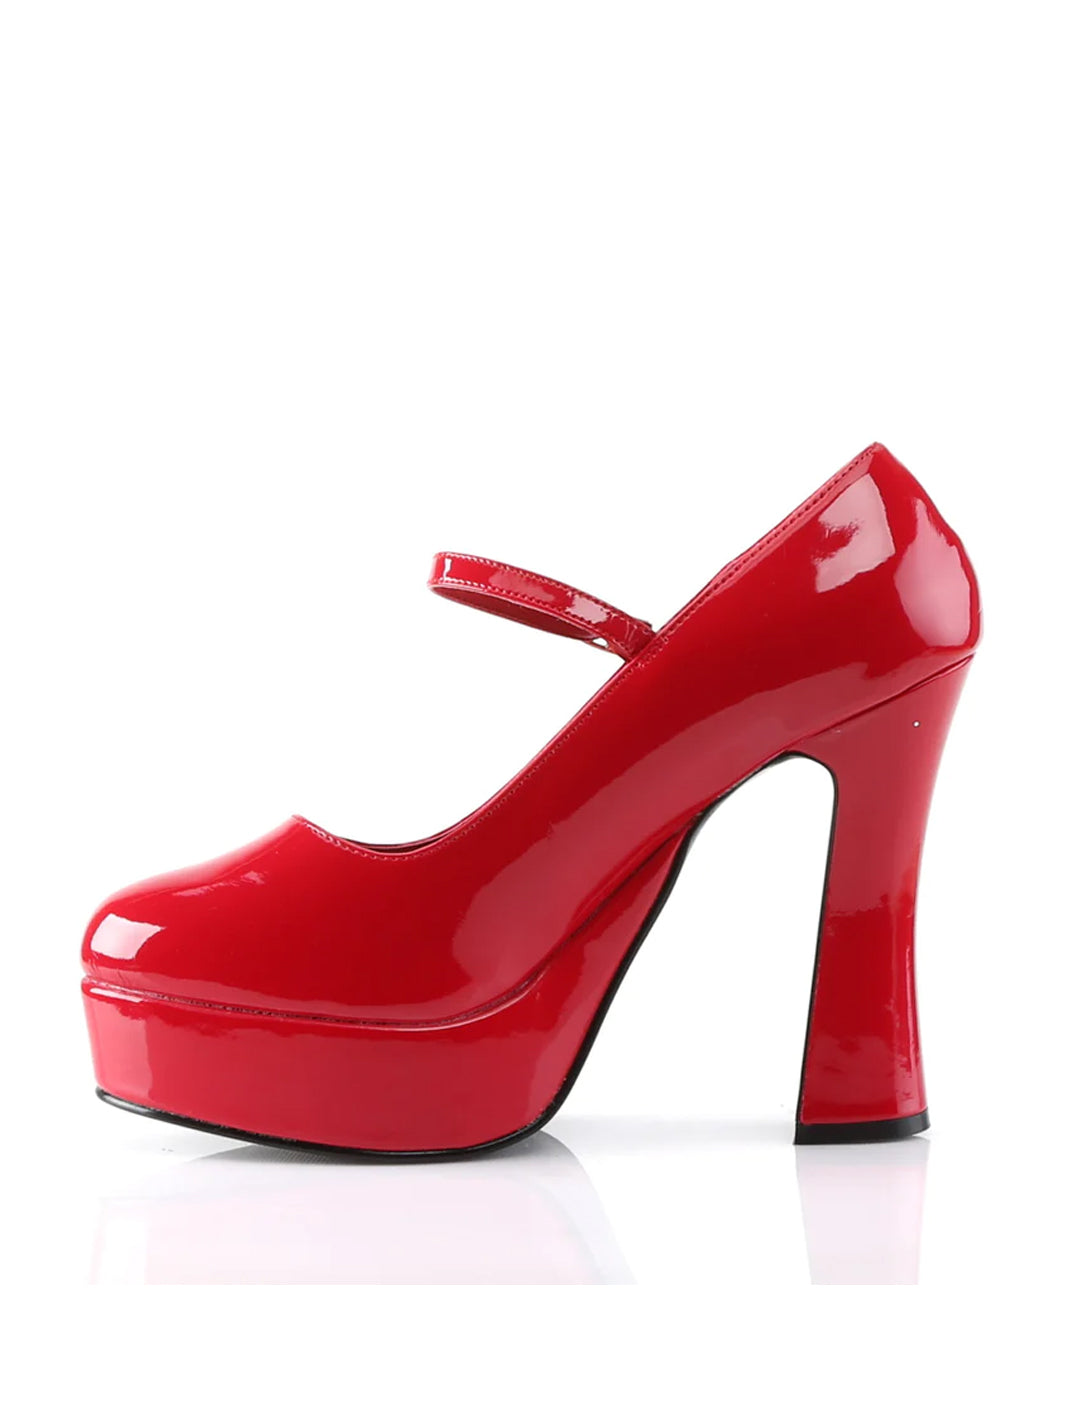 DEMONIA DOLLY-50 - RED PATENT ✰ PRE ORDER ✰